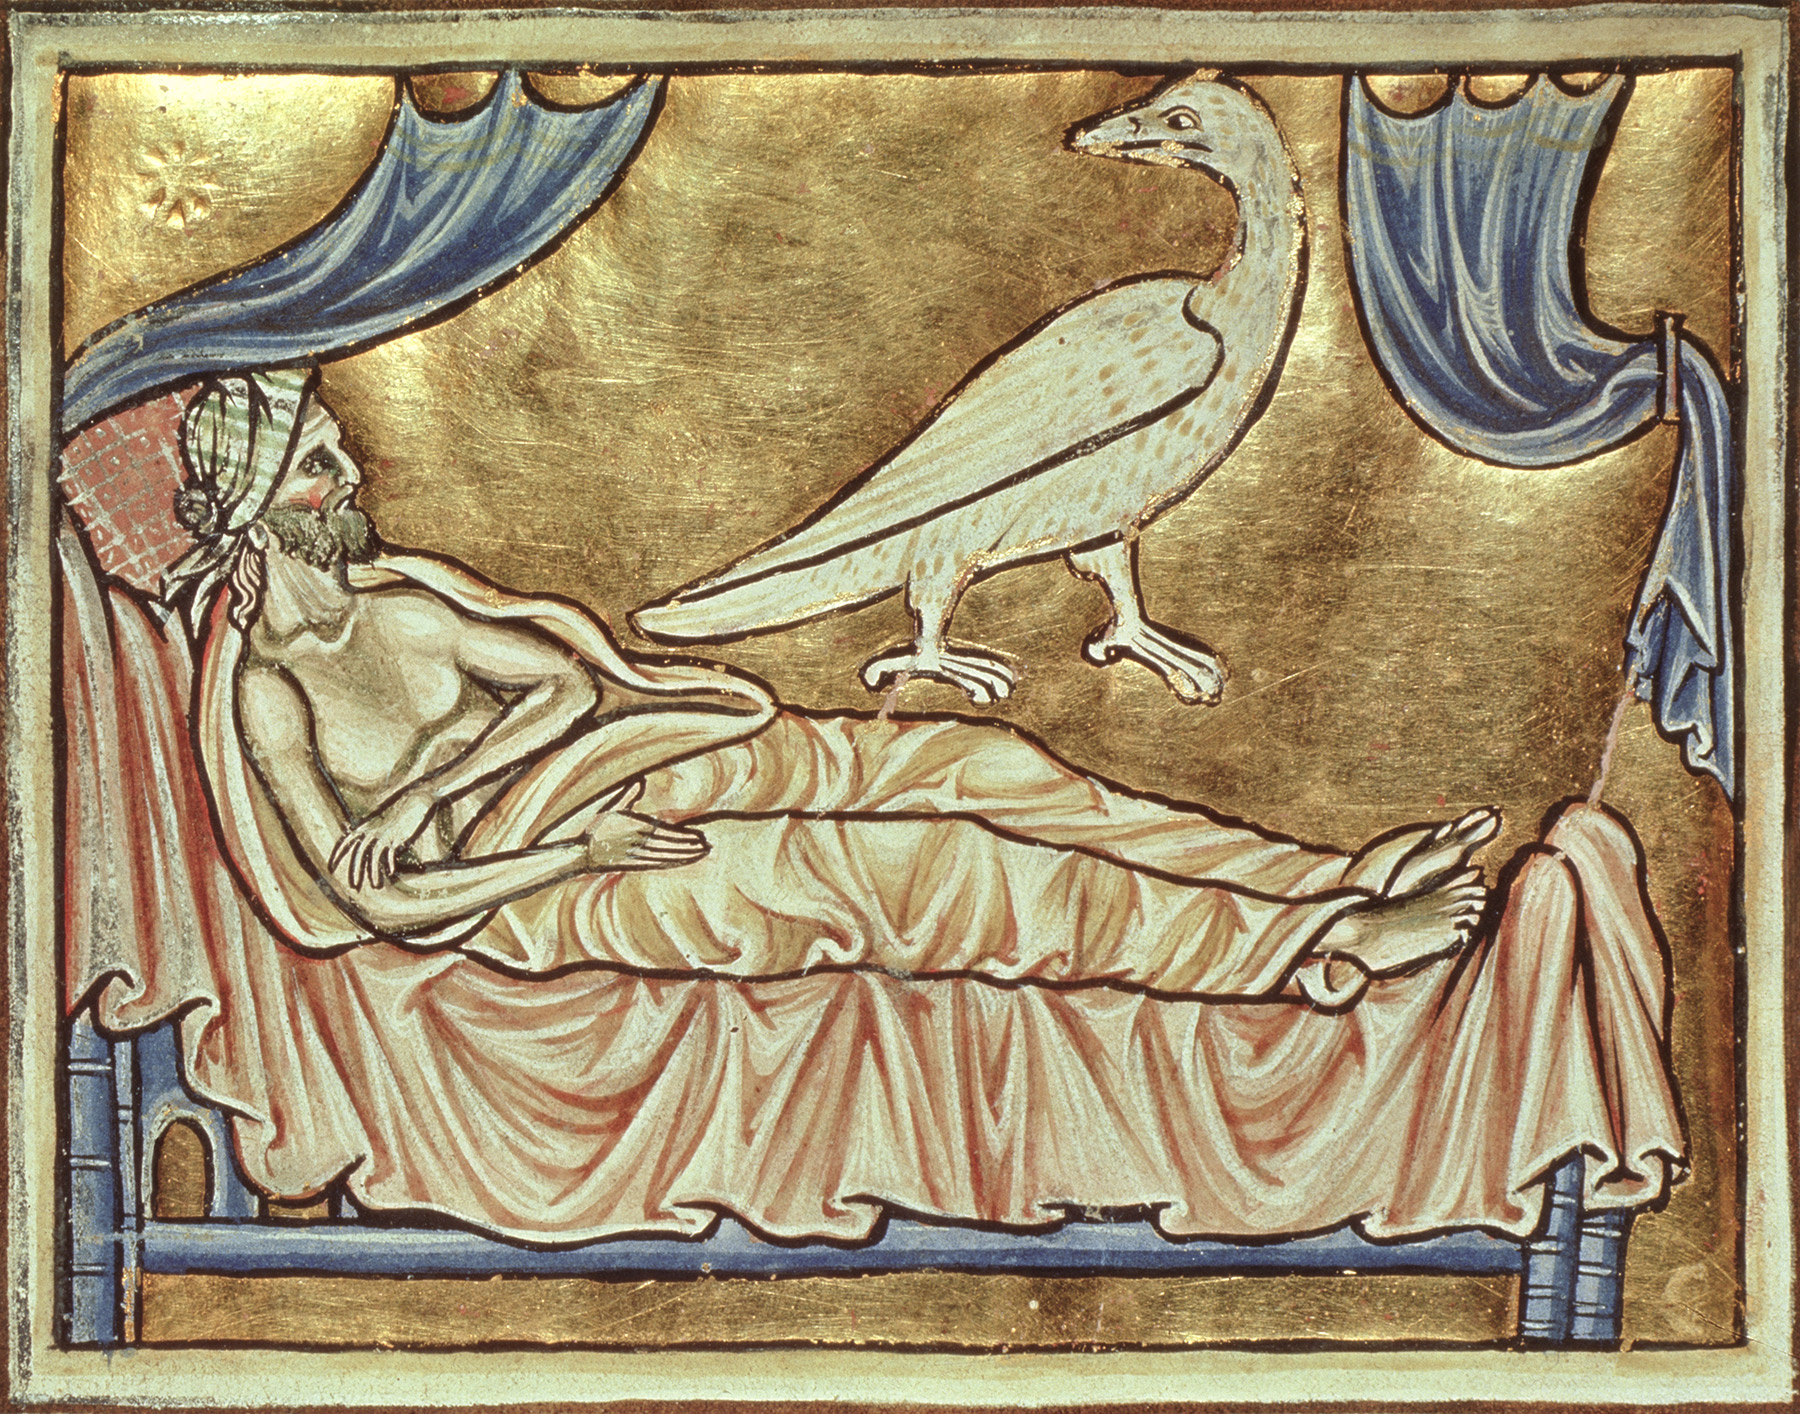 A caladrius bird, which foretold the fates of the sick, over a man in his bed, from a 13th-century copy of the ‘Physiologus’, Durham.